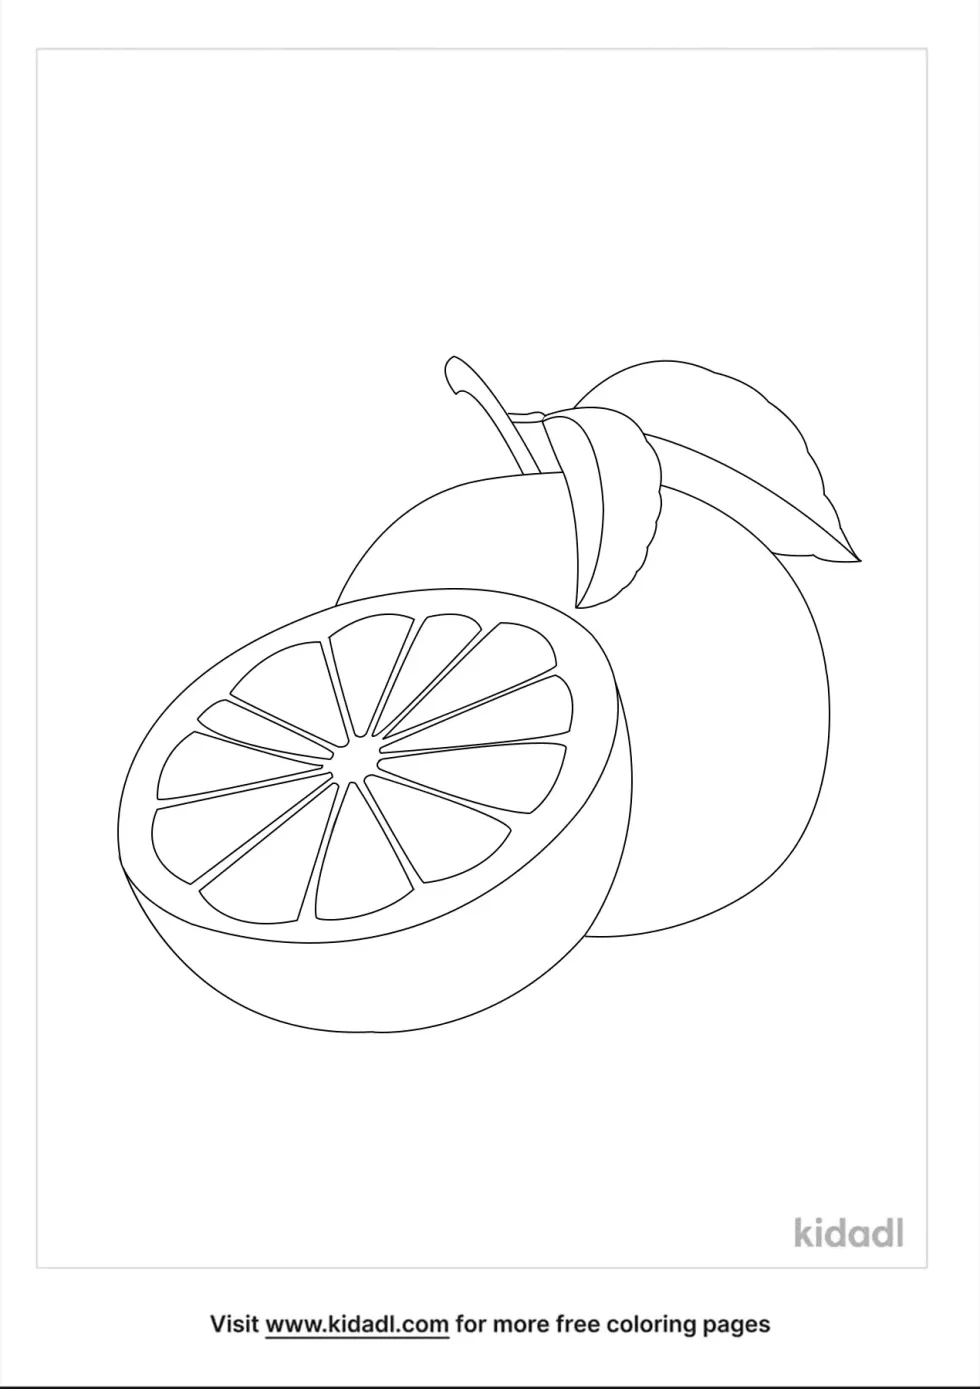 Grapefruit Coloring Page